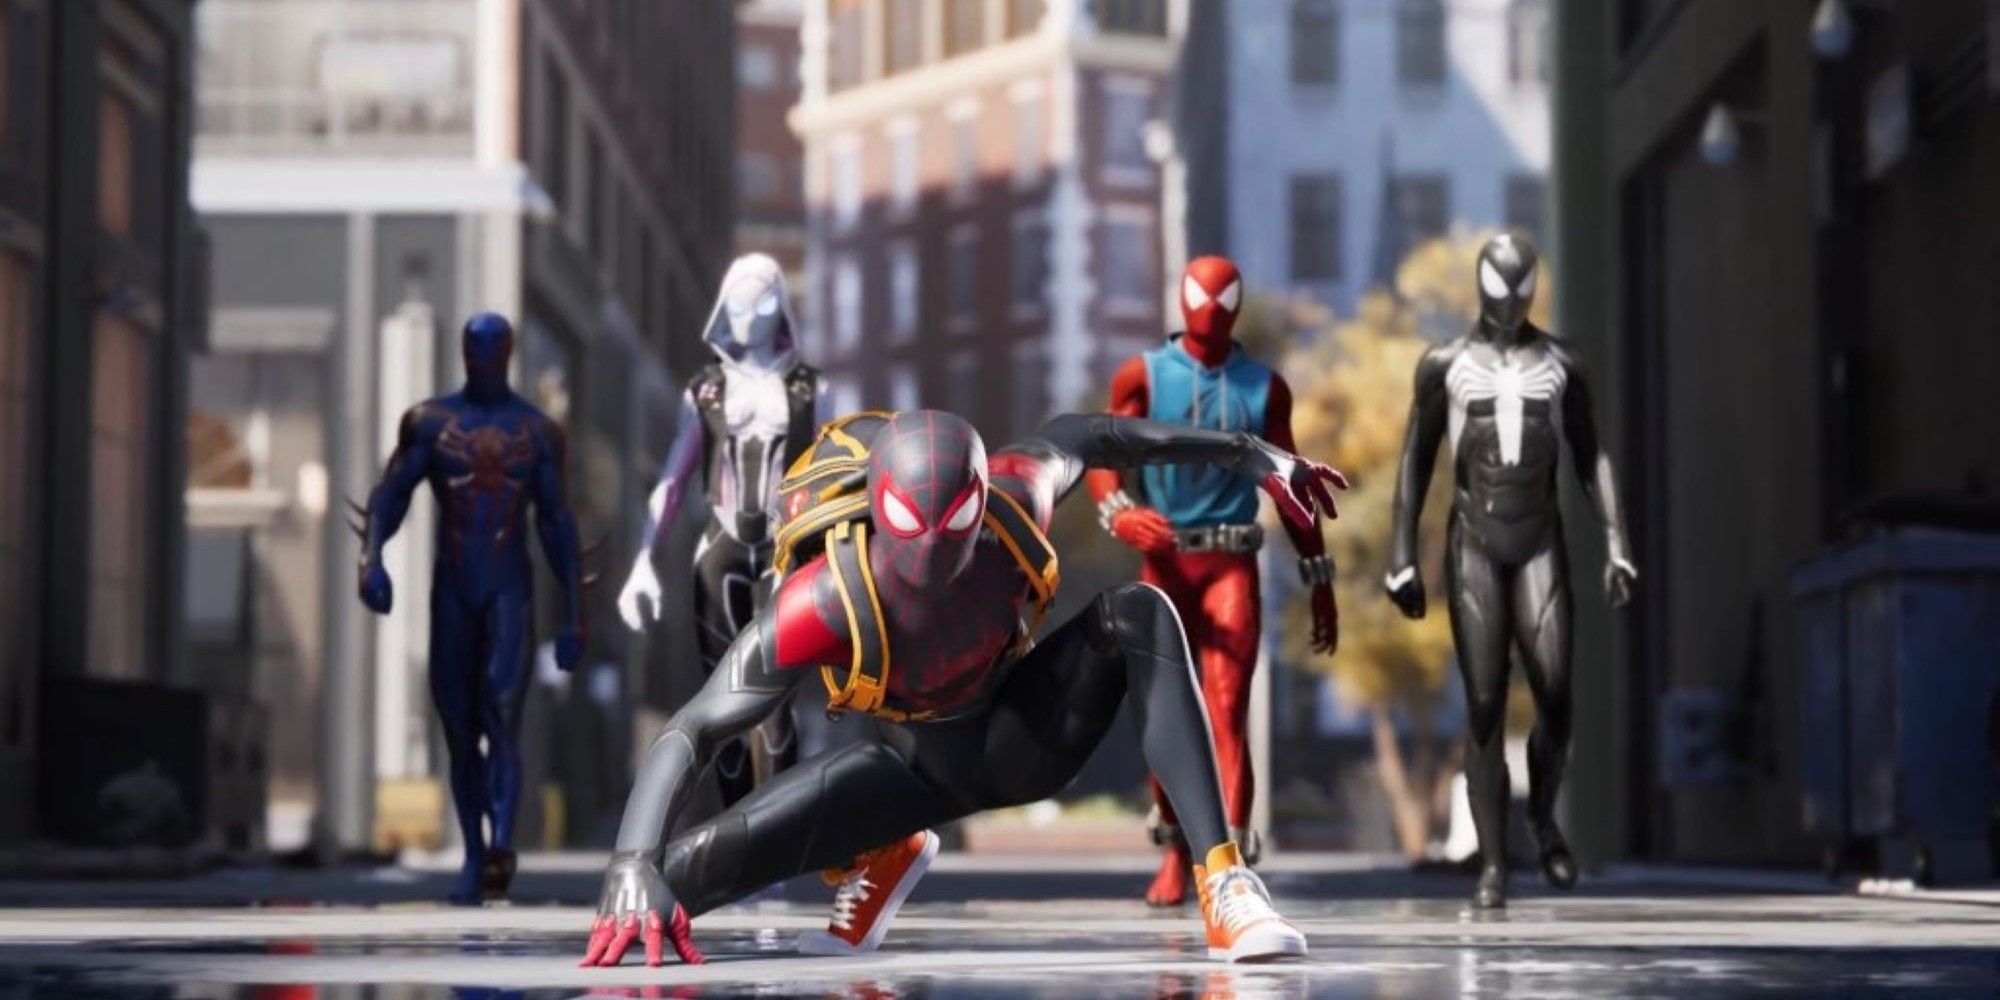 Spider-Man The Great Web trailer showing five different Spideys including Miles, Peter, and Gwen